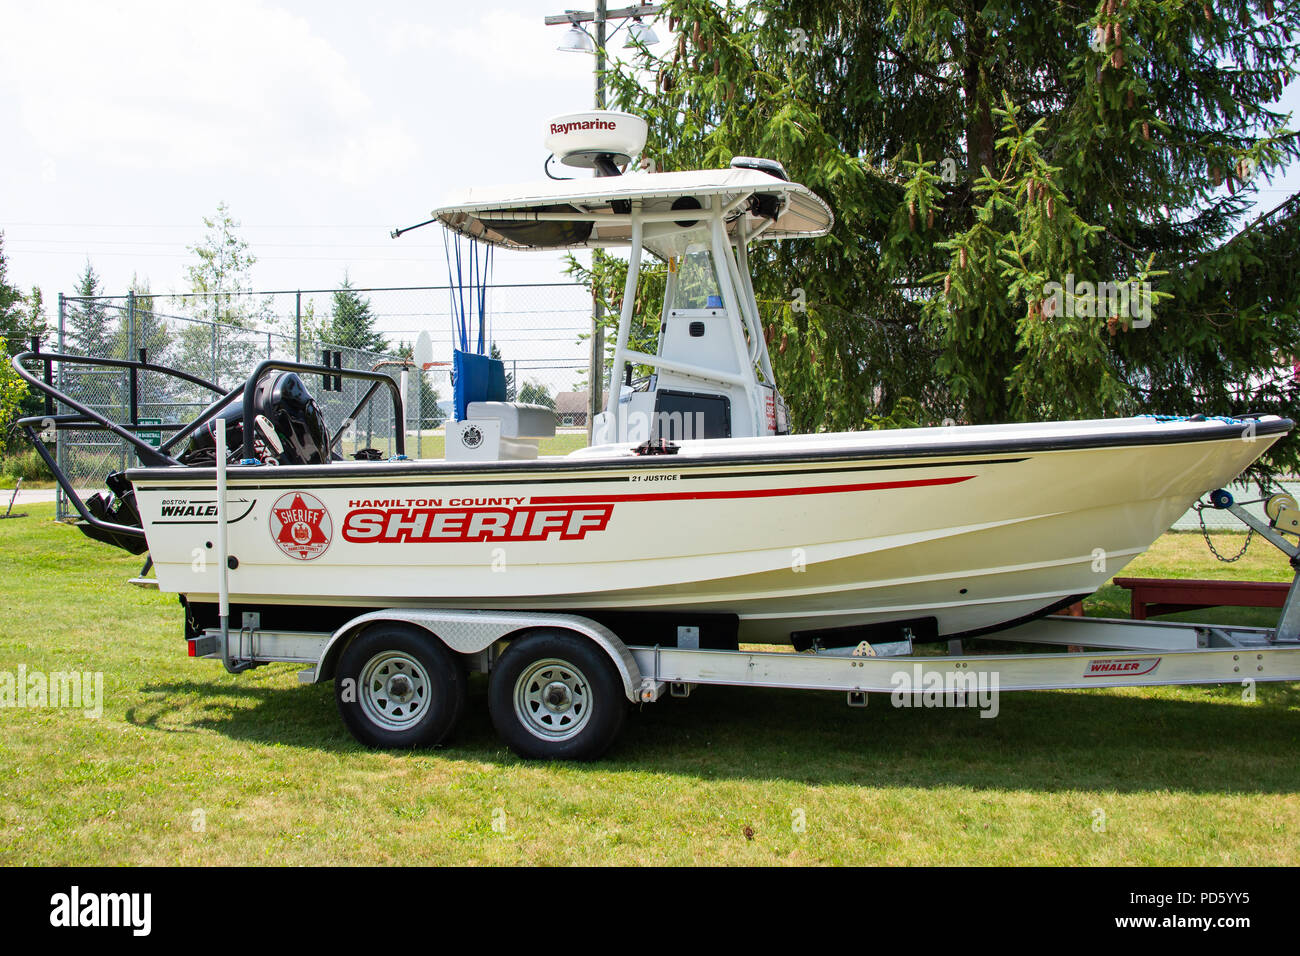 A 21' Justice model of the Boston Whaler set up for police work by the Hamilton County, NY sheriff department sitting on a trailer in a grass field. Stock Photo